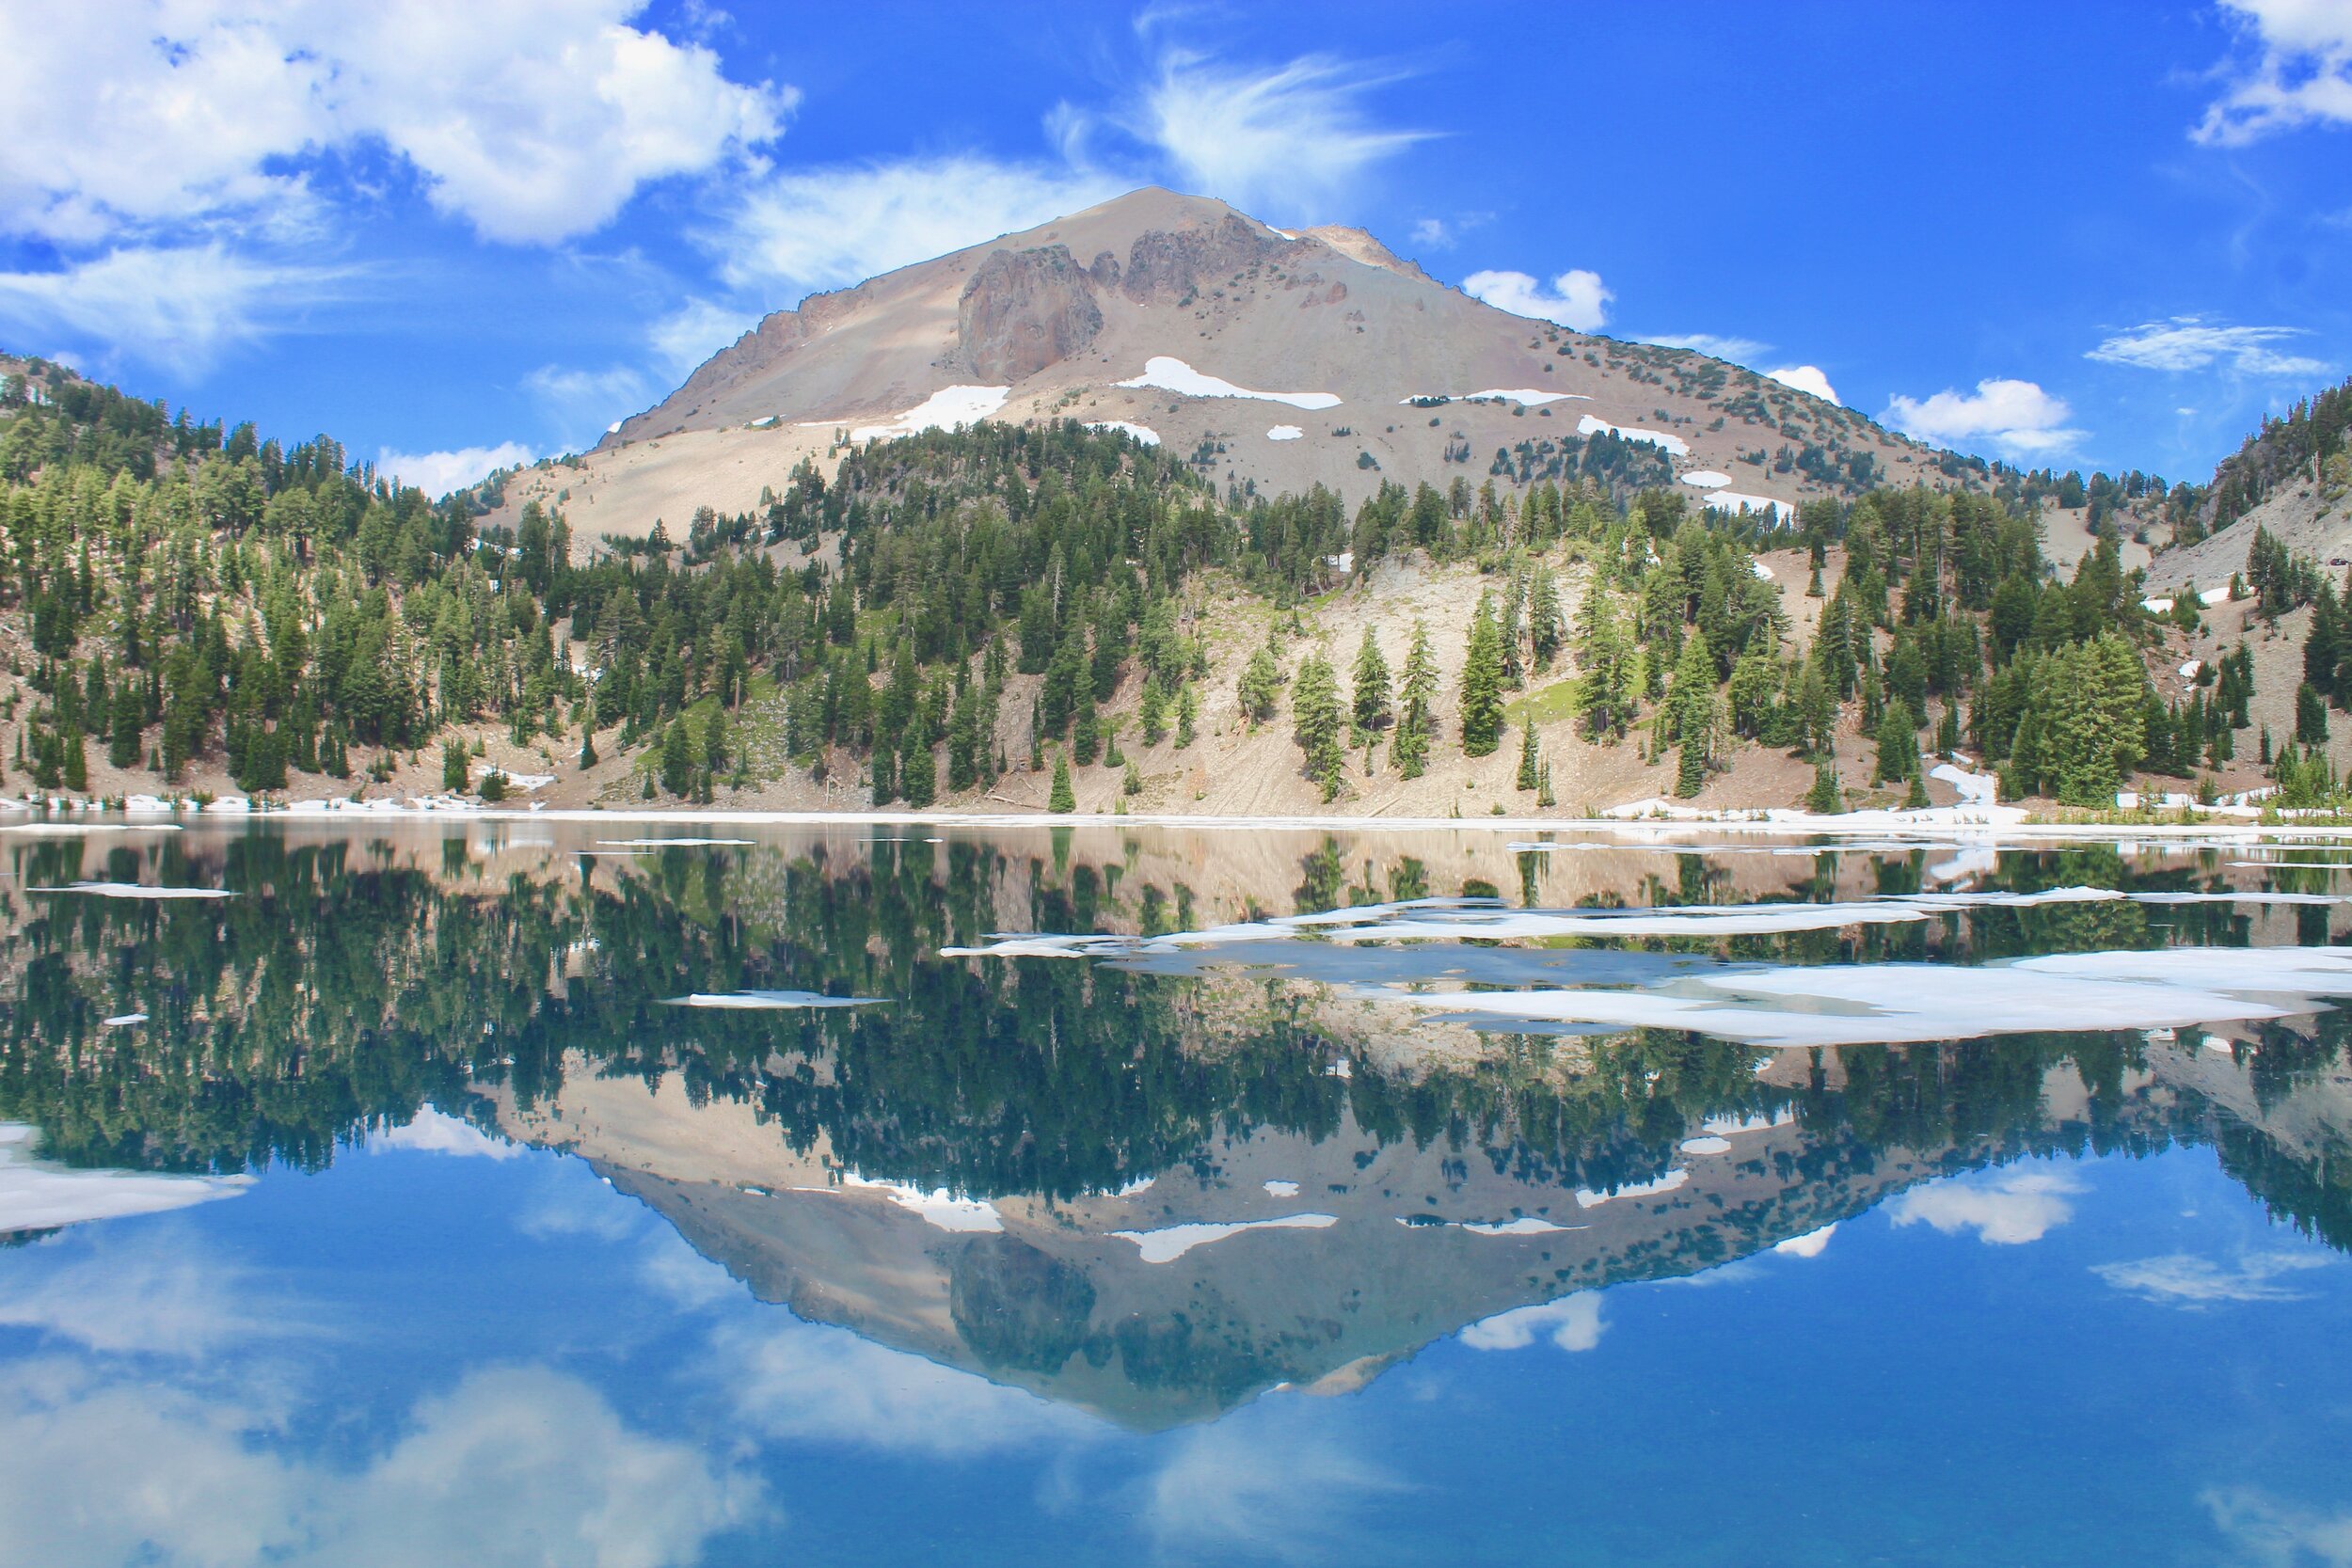 Lassen Volcanic National Park Itinerary for 1-3 days and top things to do  in 2023 - Destination Checkoff